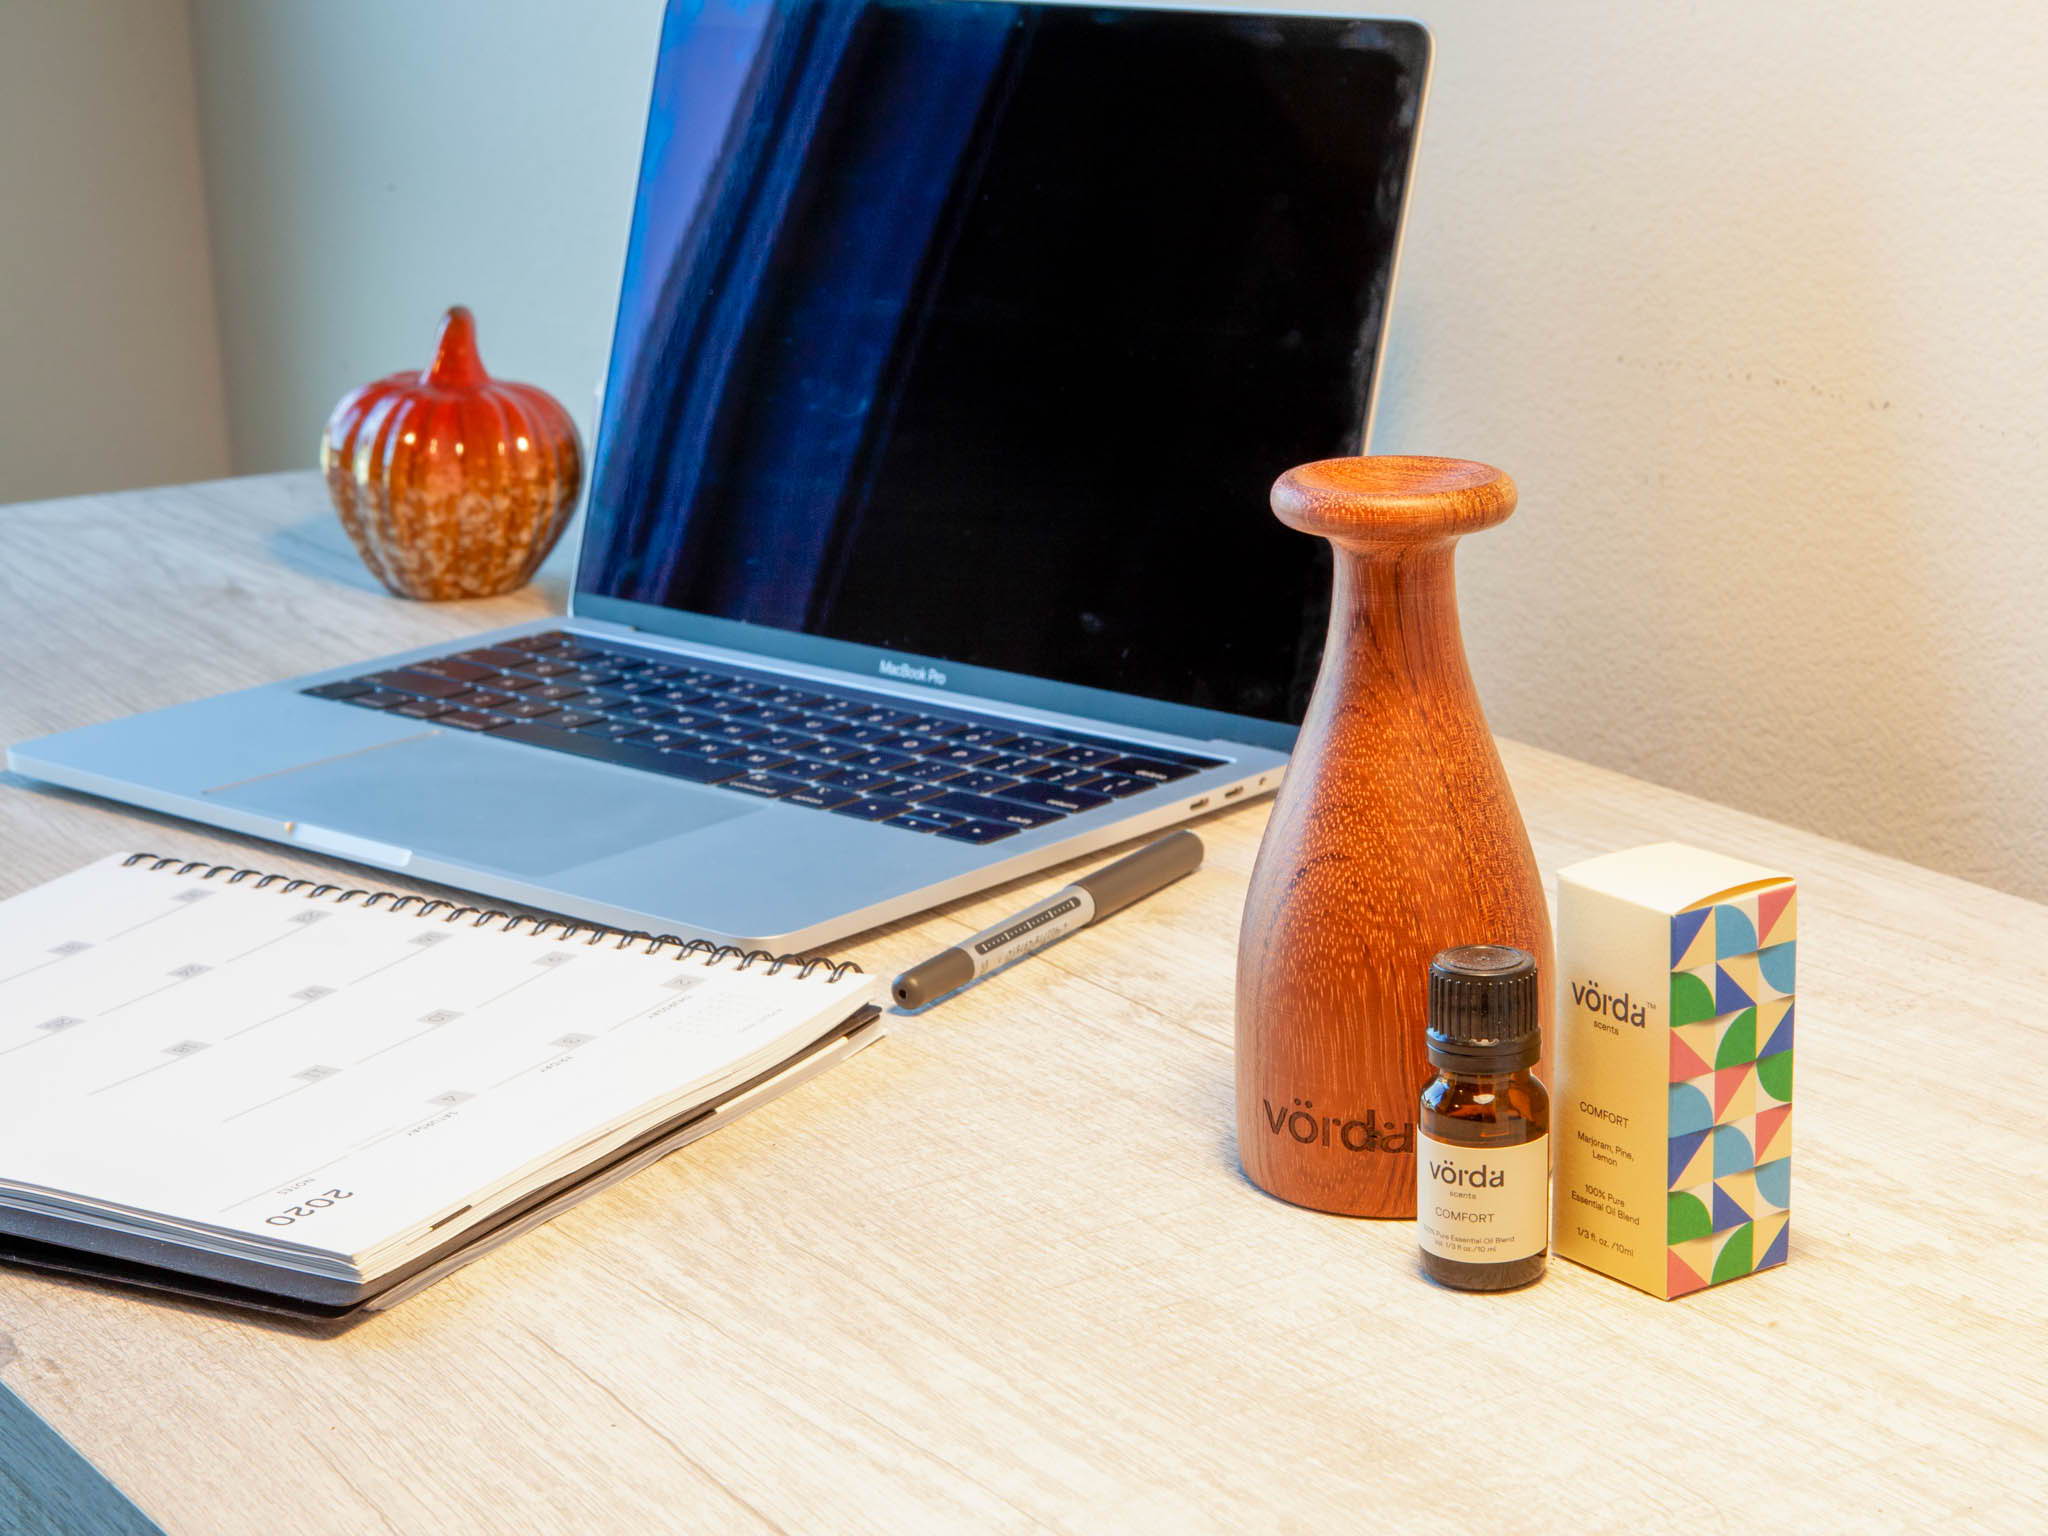 Best Places To Put an Essential Oil Diffuser in Your Home – Escents